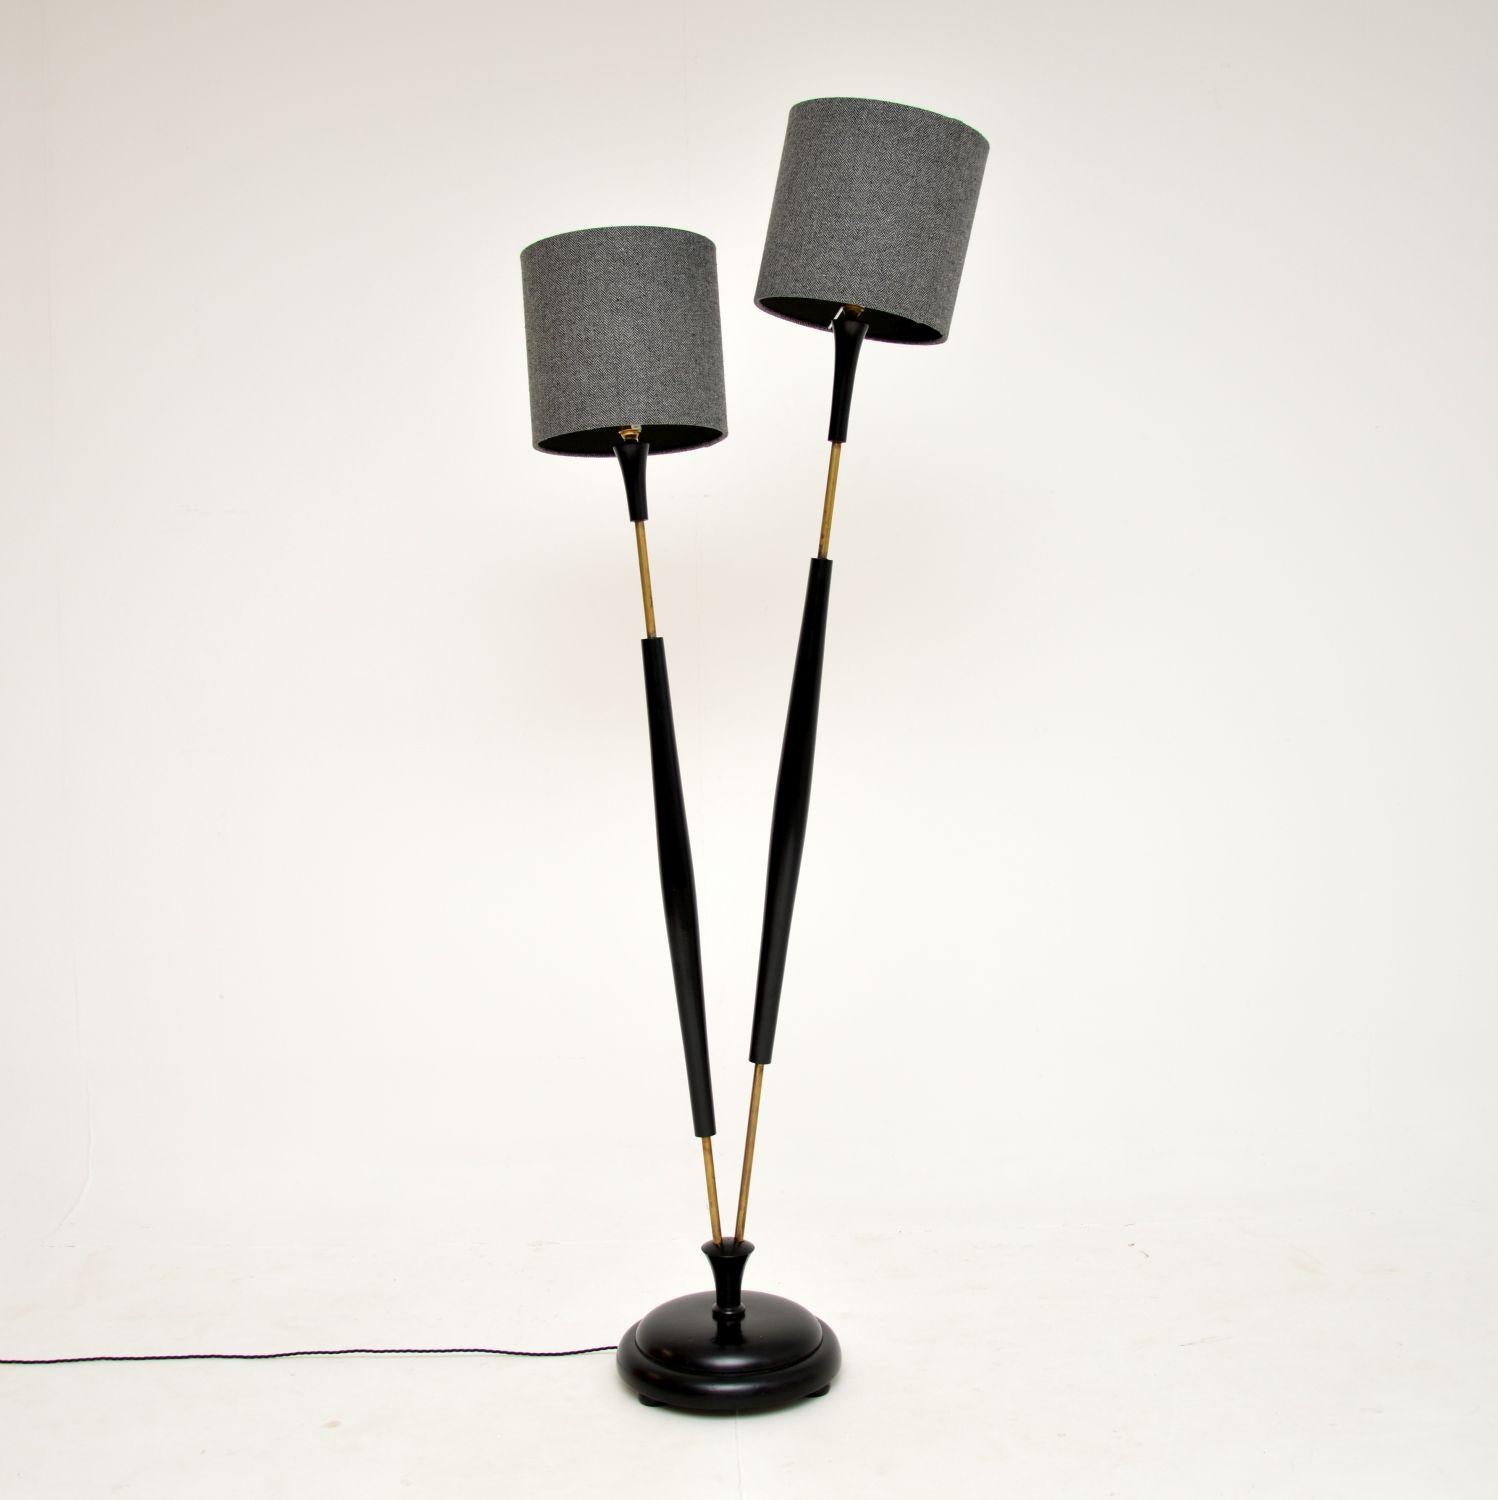 A very stylish and unusual vintage floor lamp in ebonized wood and brass. This was made in England, it dates from the 1960’s.

It is extremely well made and has a fantastic design, with two lamp stands coming out from one base.

We have had the wood